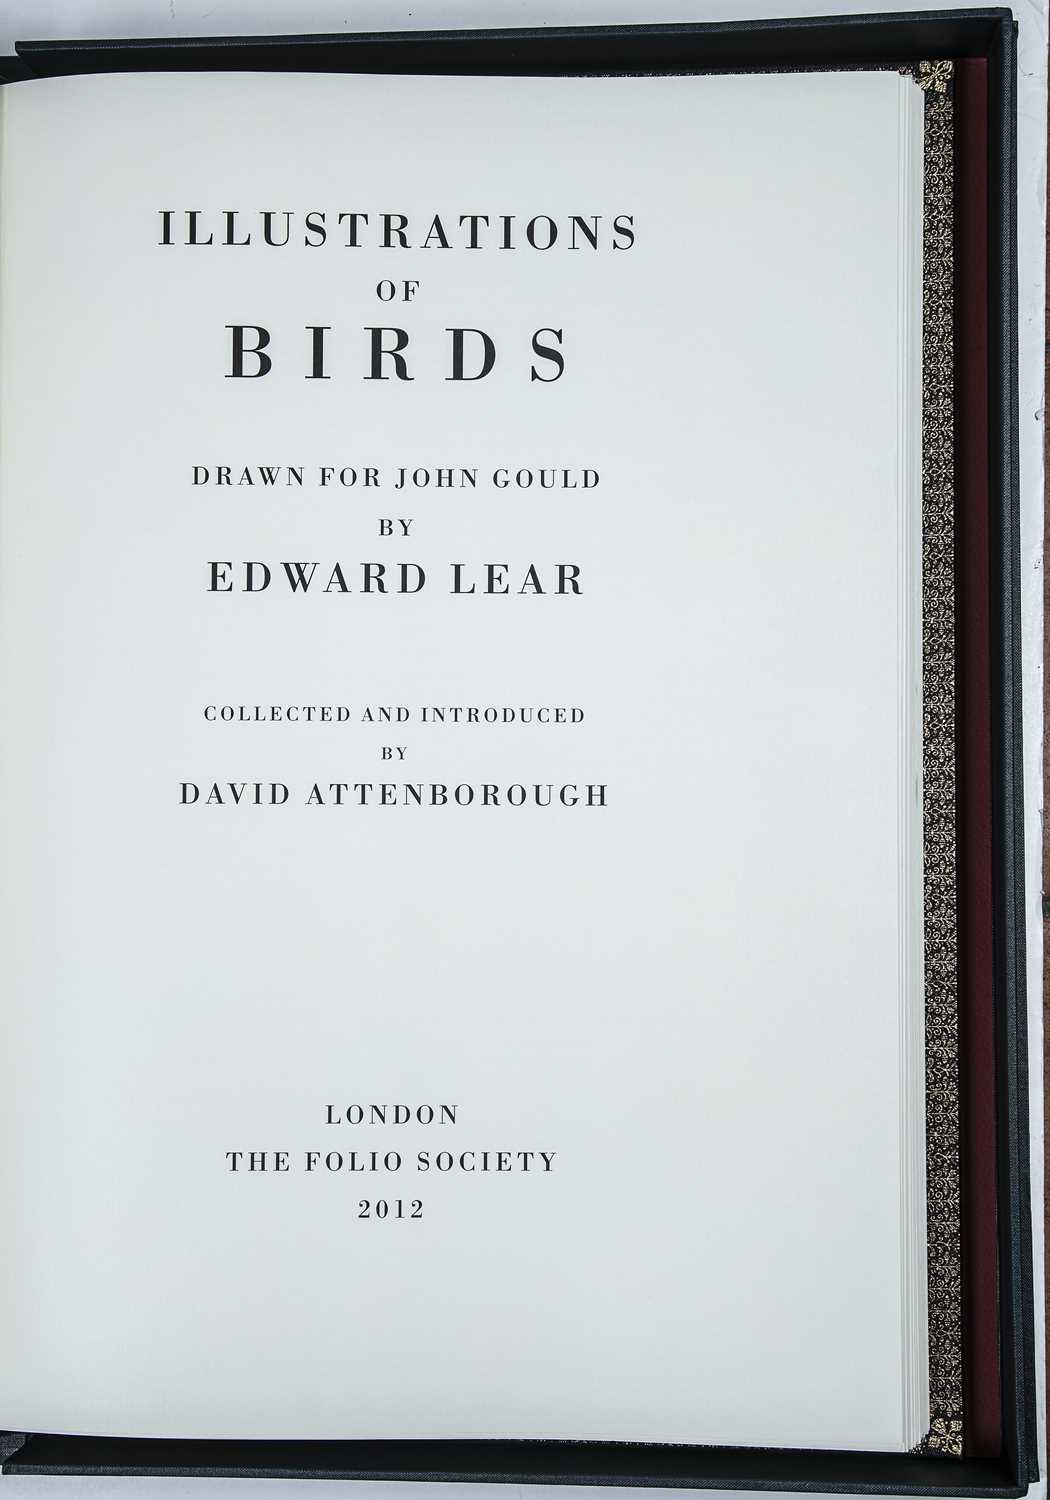 Folio Society. 'Illustrations of Birds Drawn by John Gould by Edward Lear'. Collected and introduced - Image 3 of 13